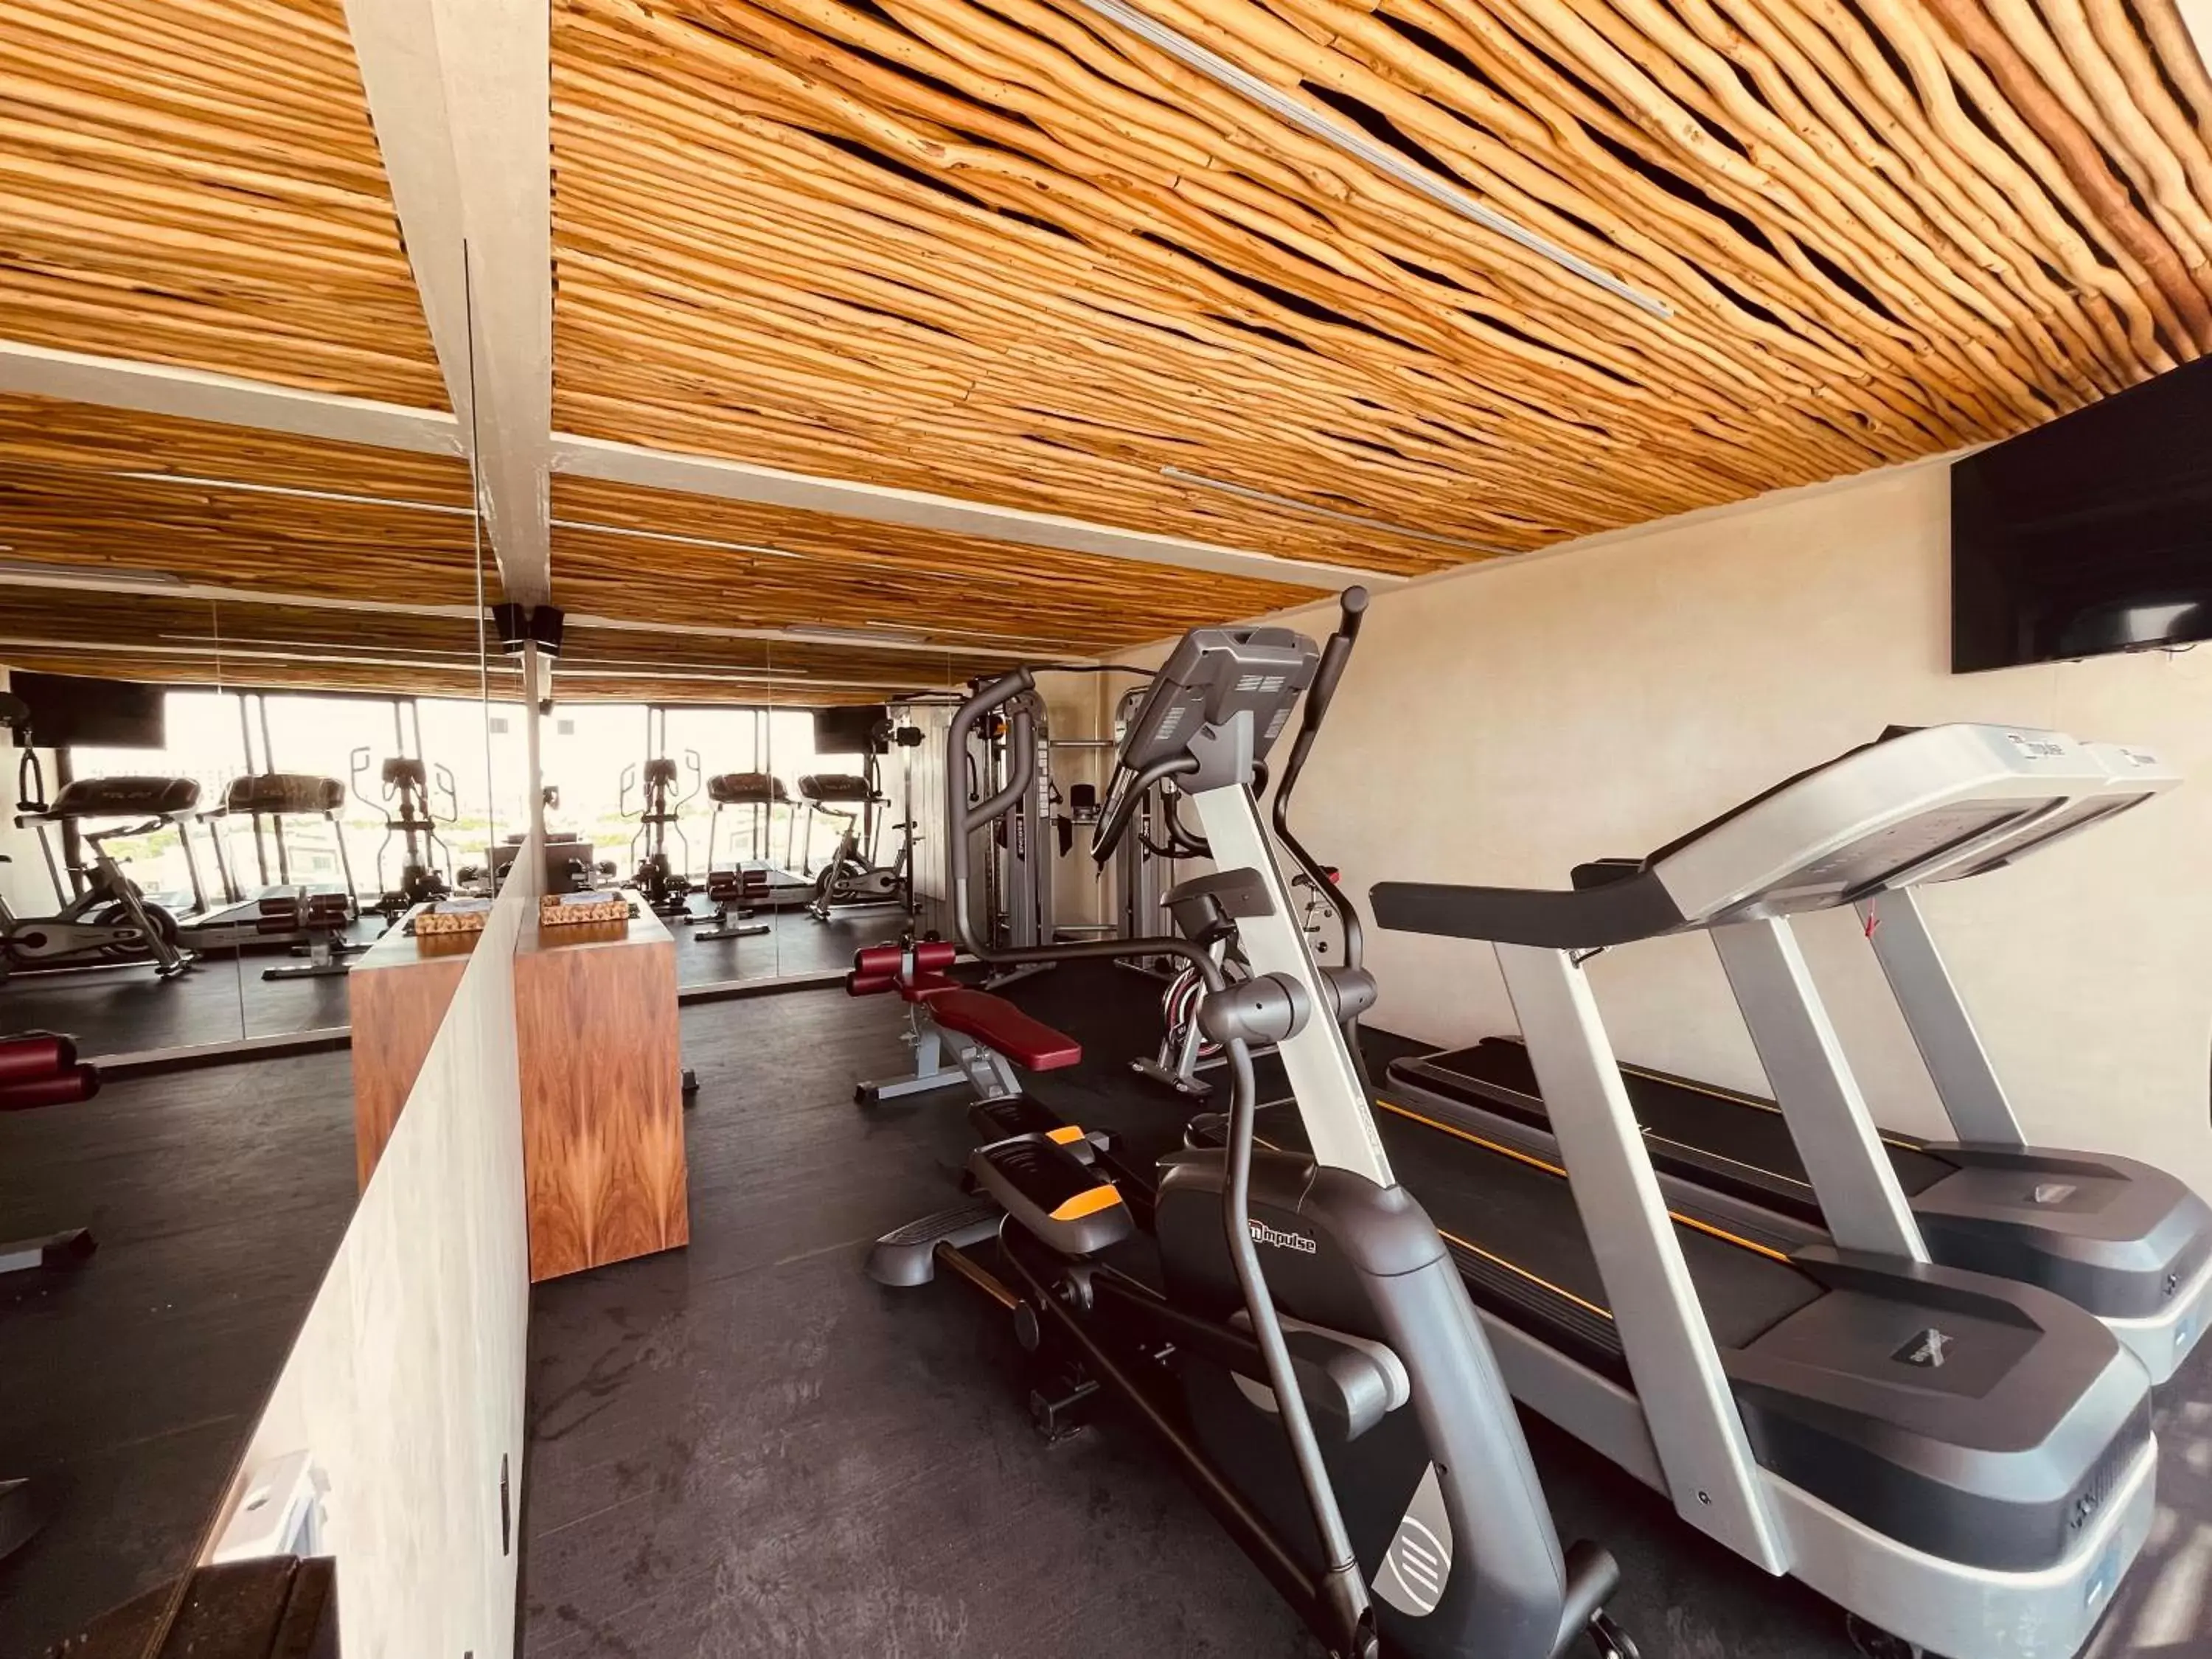 Fitness centre/facilities, Fitness Center/Facilities in Hive Cancun by G Hotels